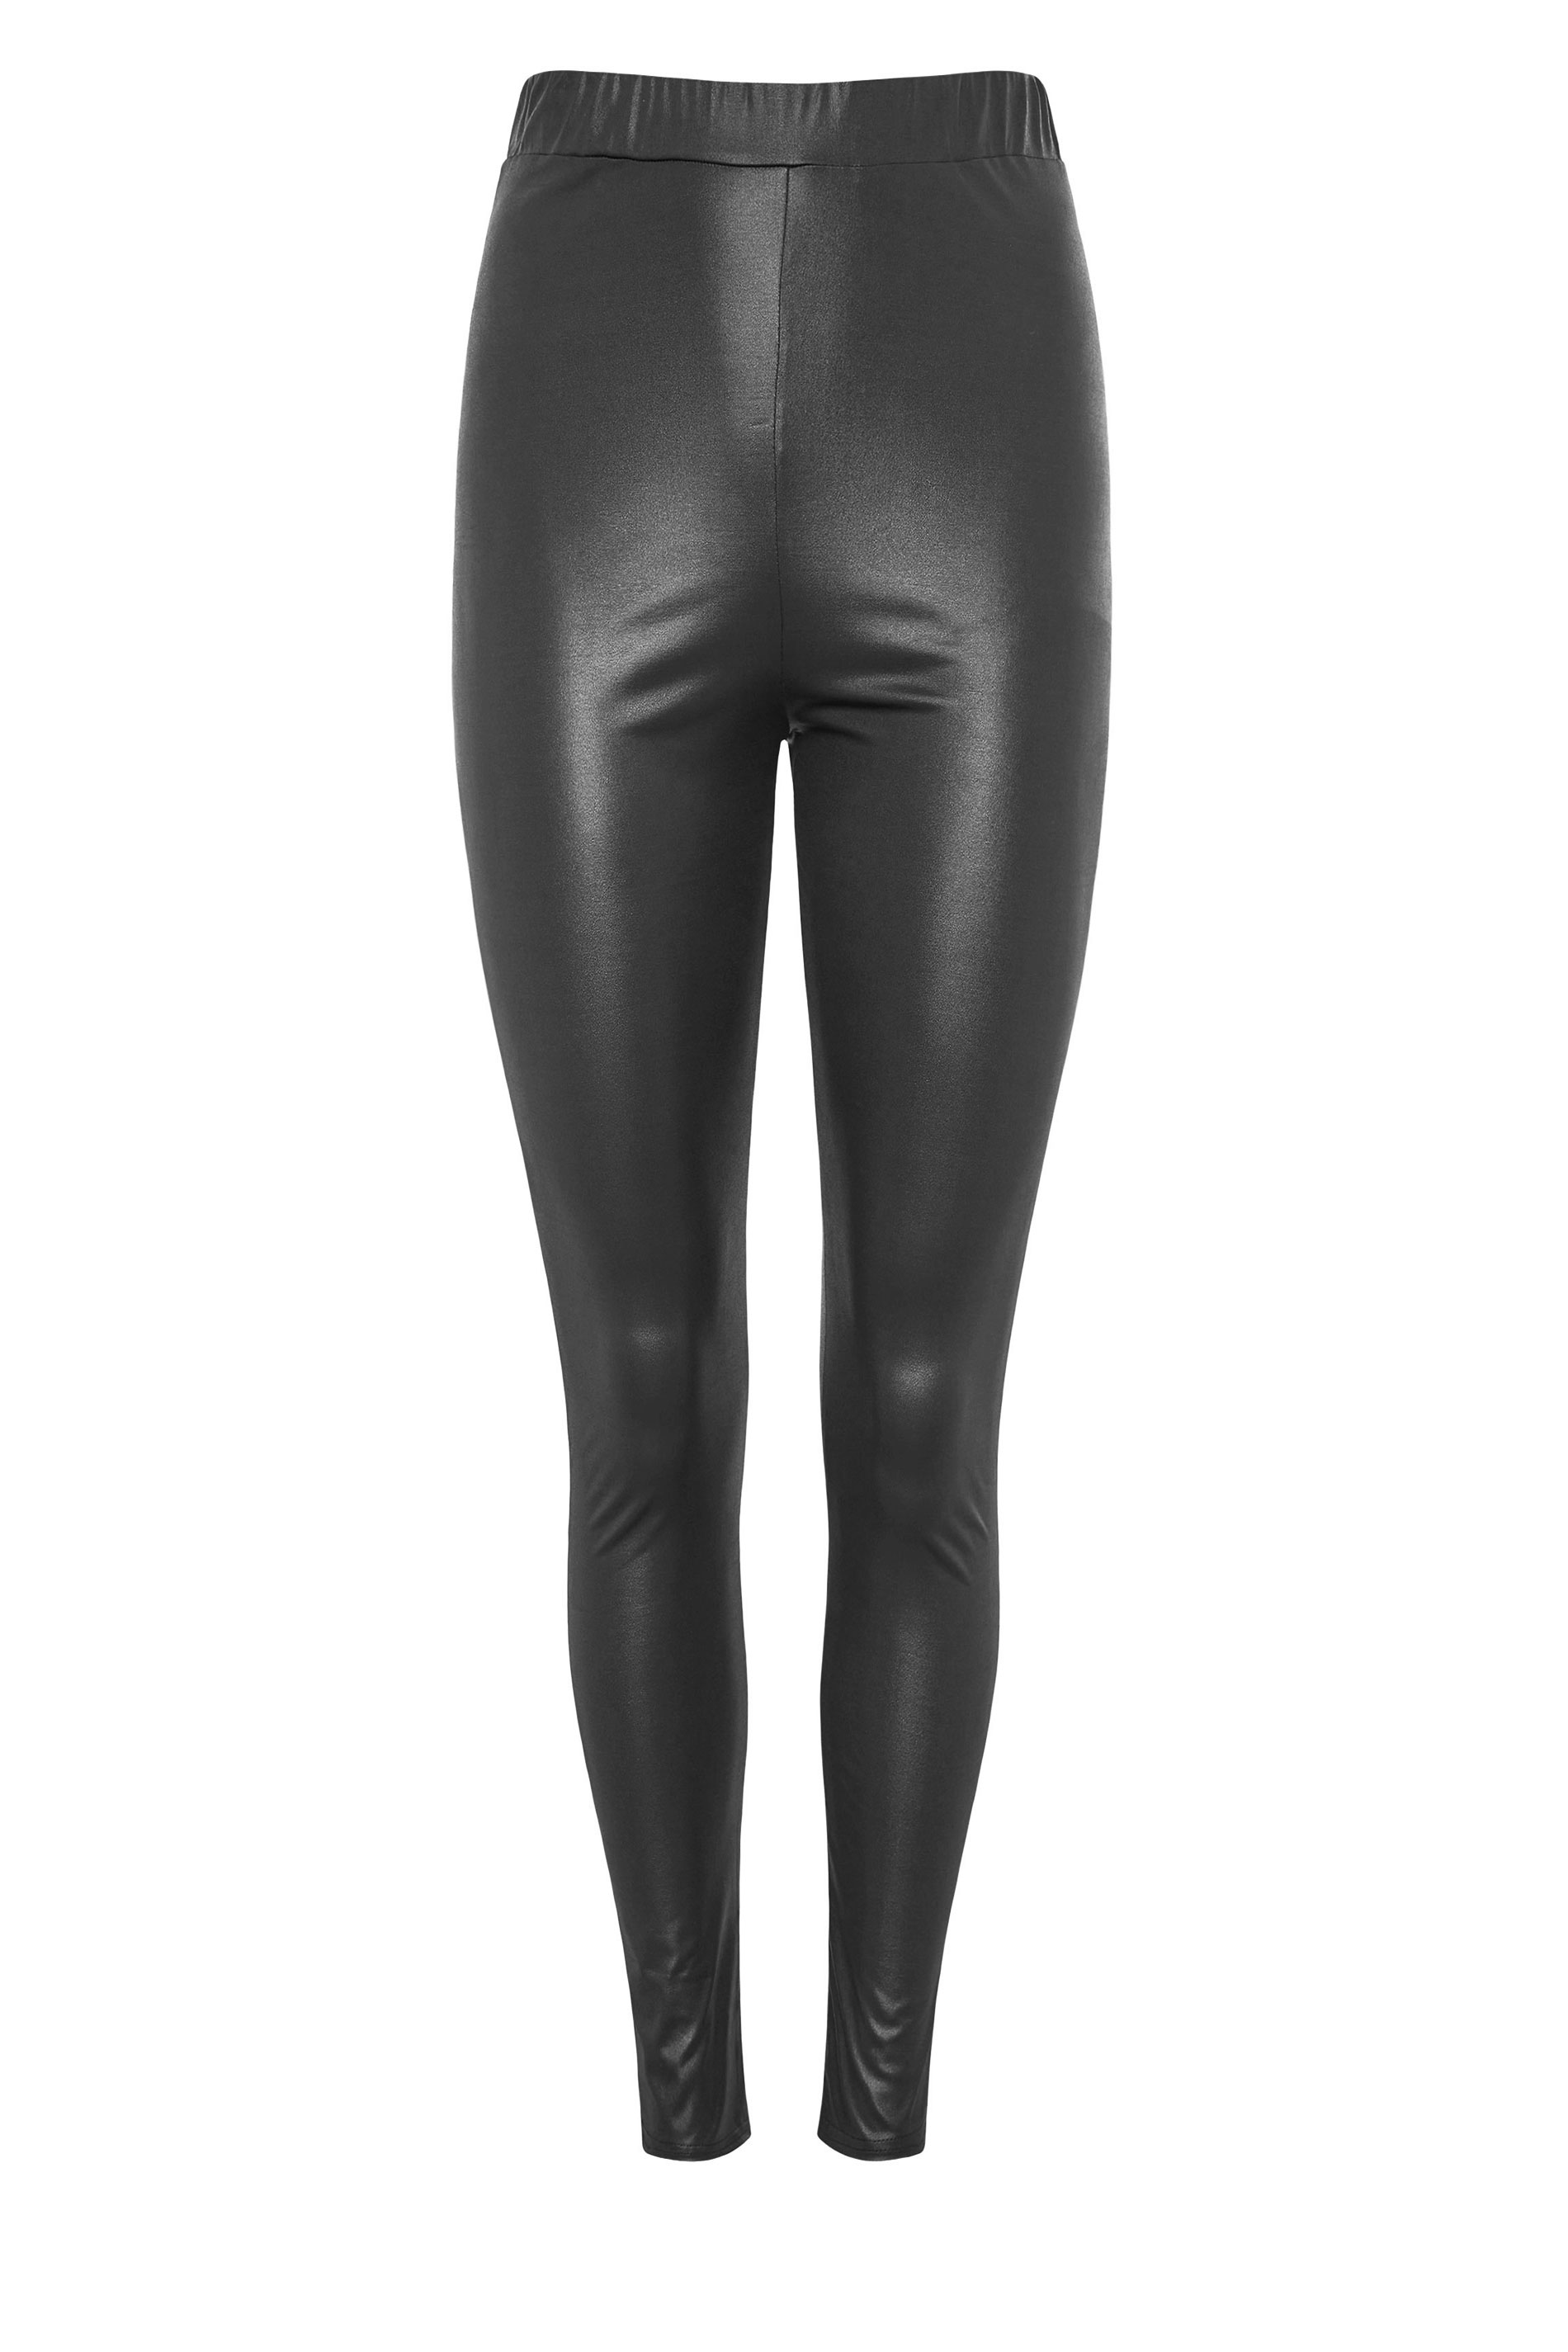 Tall Women's LTS Black Faux Leather Look Leggings | Long Tall Sally